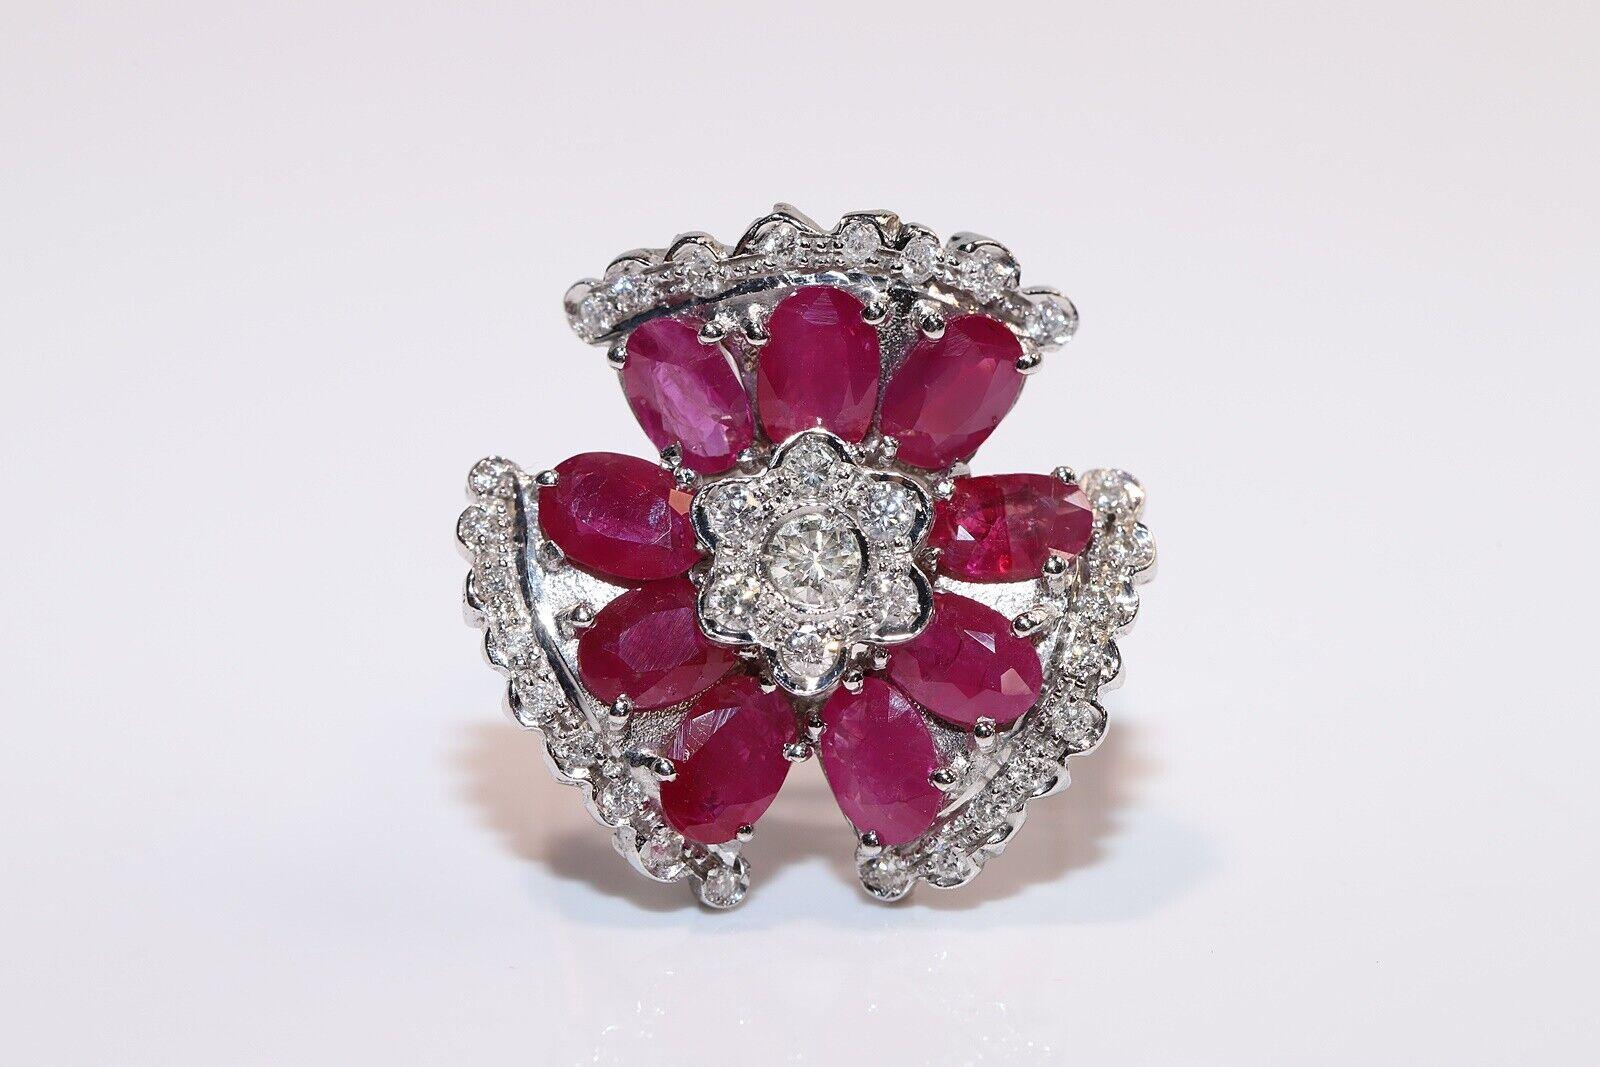 In very good condition.
Total weight is 8.4 grams.
Totally is diamond 0.65 carat.
The diamond is has H-I color and vs-s1 clarity.
Totally is ruby 6.5 carat.
Ring size is US 7.5 (We offer free resizing)
We can make any size.
Box is not